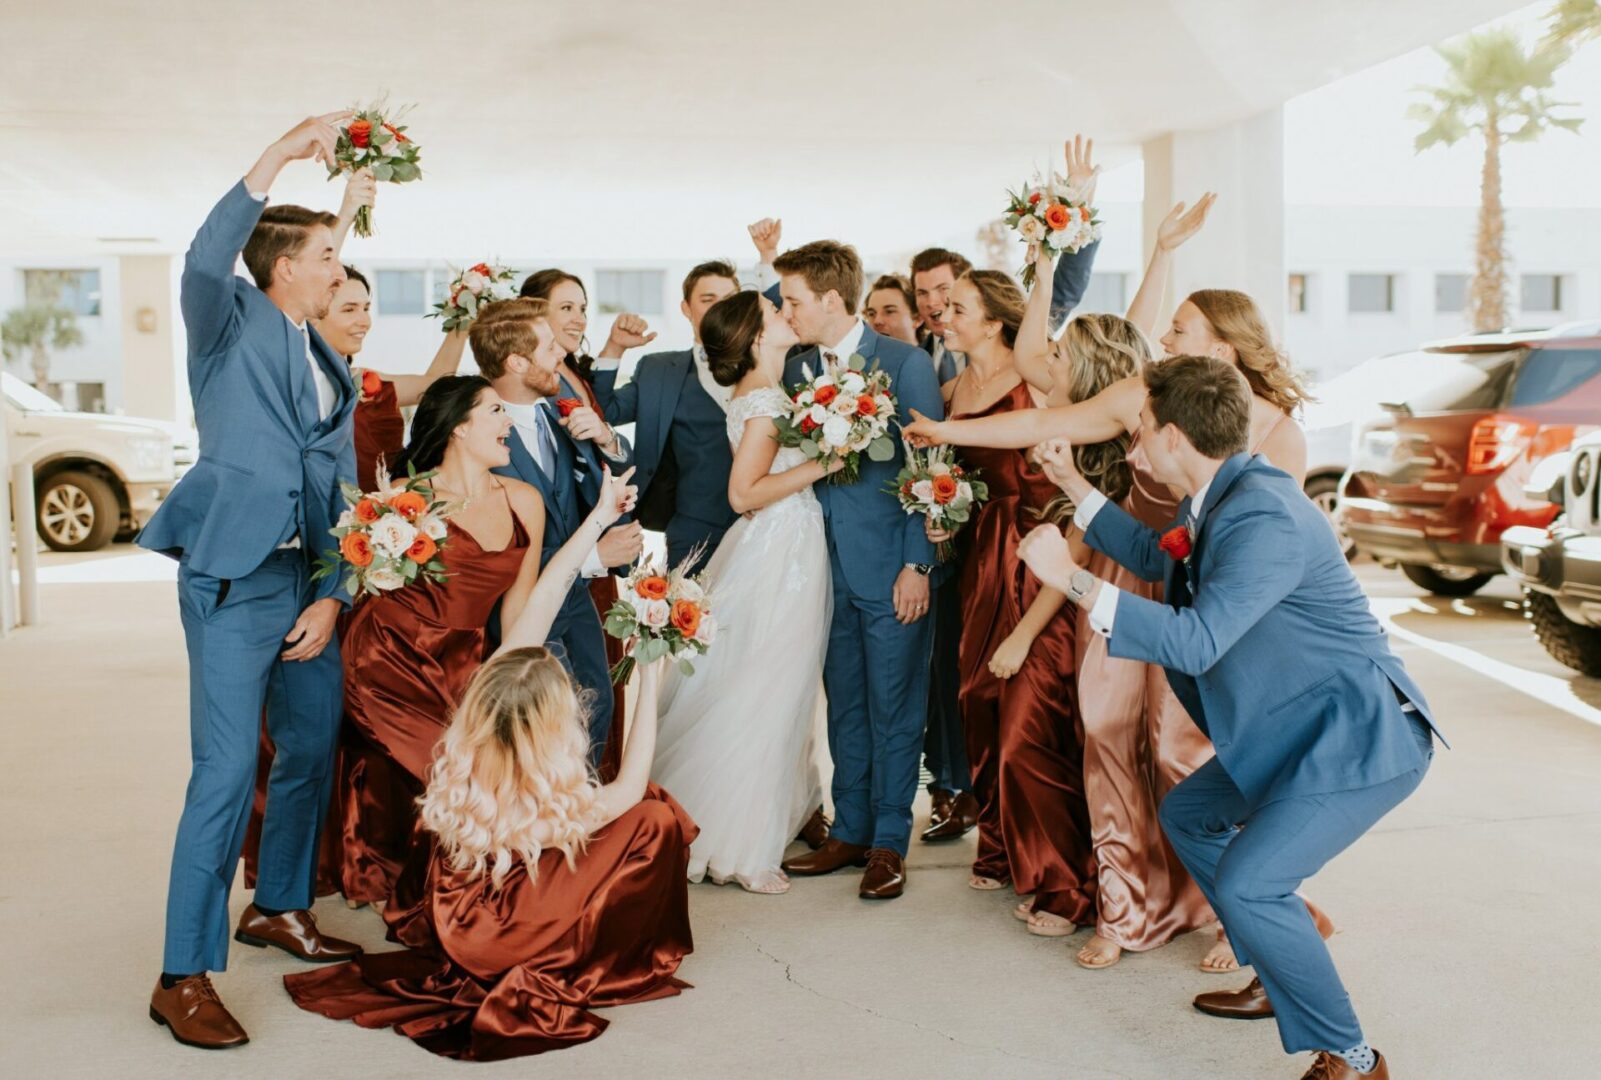 A Bride and Groom Kissing Around a Group of Guests